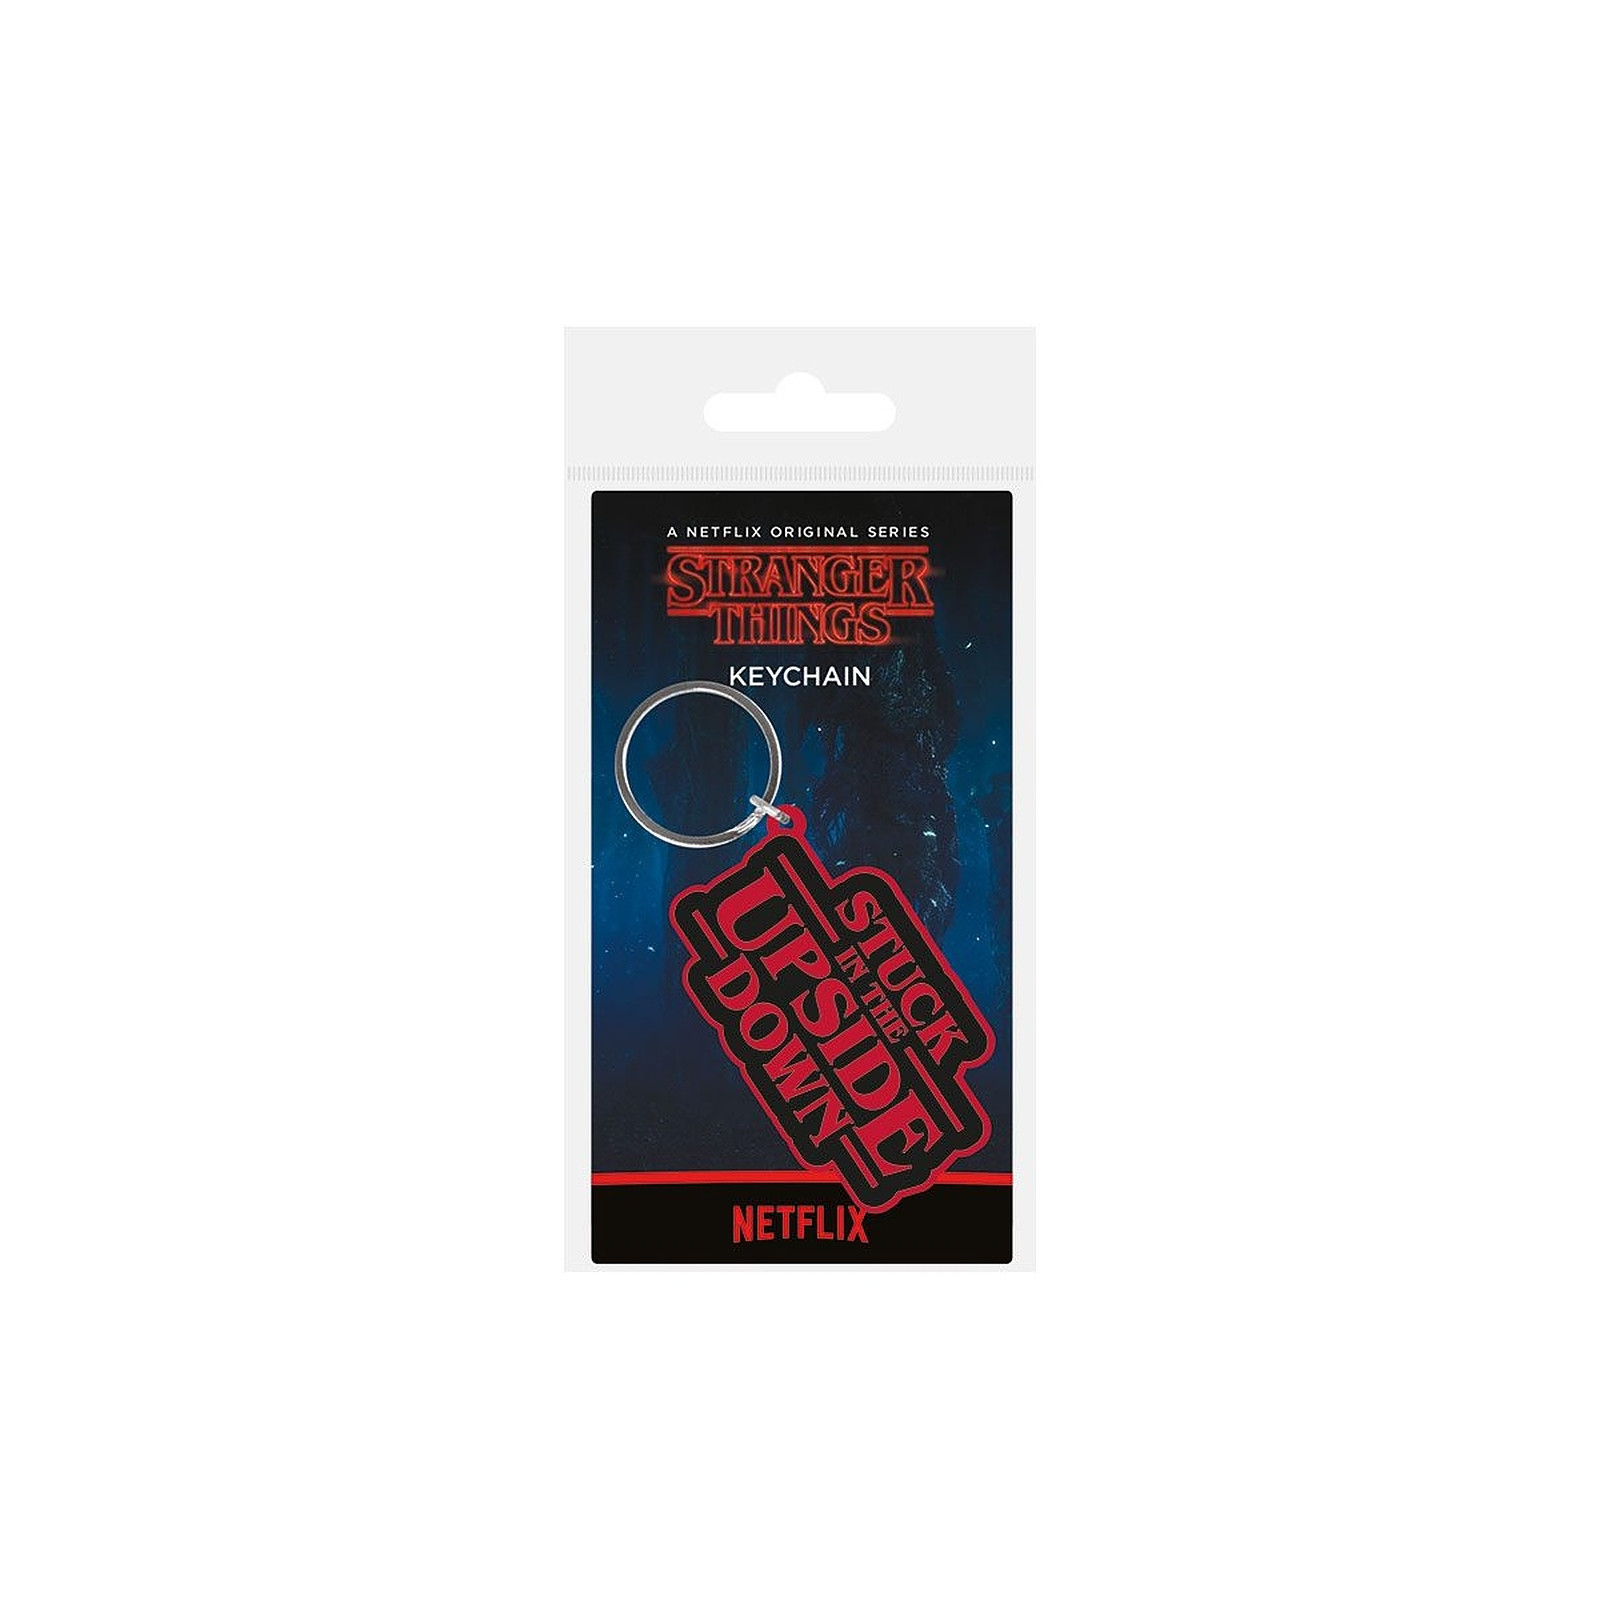 Stranger Things - Porte-cles Stuck In The Upside Down 6 cm - Porte-cles Pyramid International